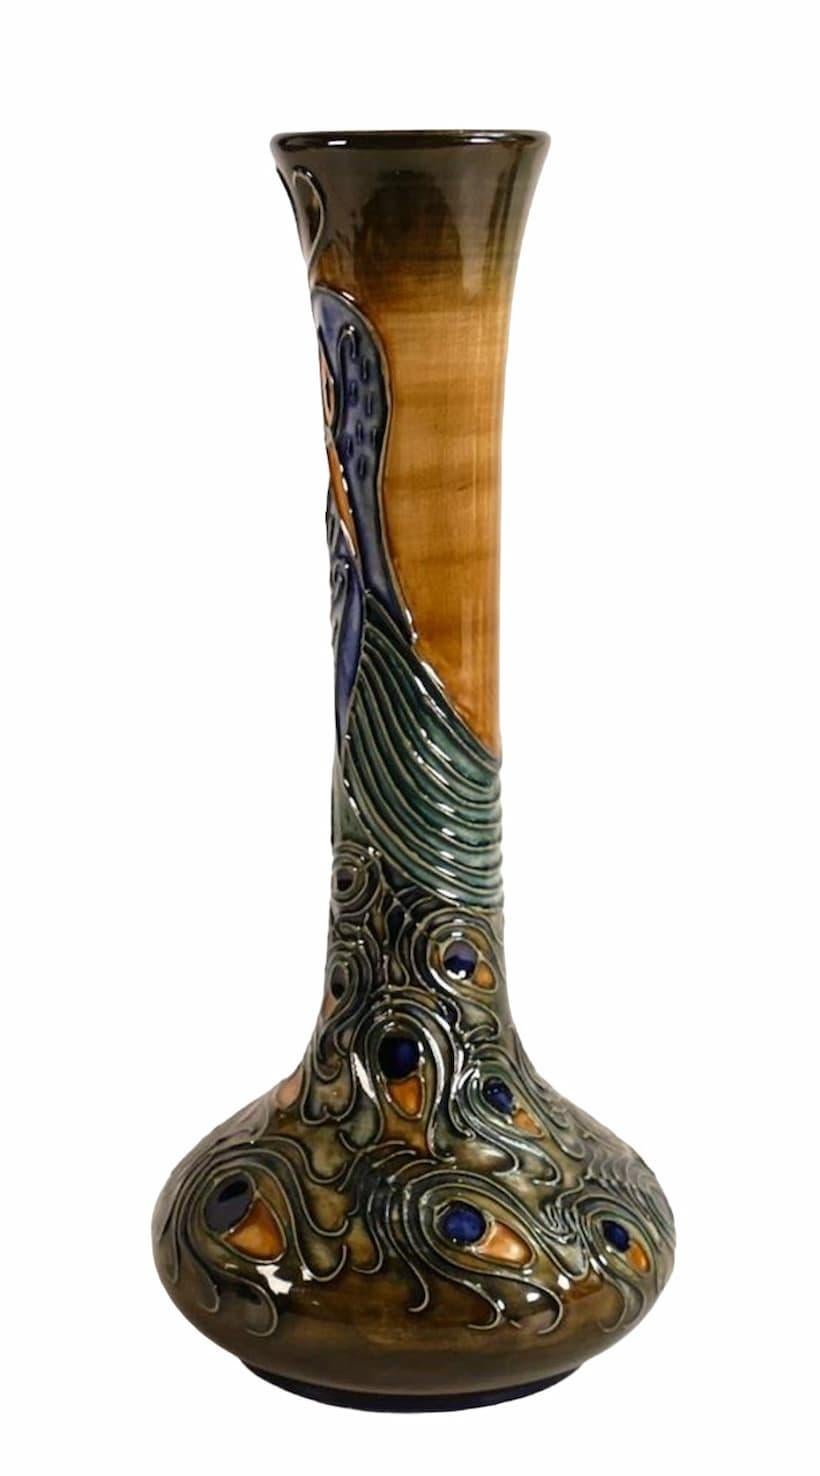 A Moorcroft Pottery Phoenix pattern vase, designed by Rachel Bishop, circa 1997, of squat form with slender neck, painted and impressed factory marks, and gilt inscribed signature to base The vase is of a squat form with a slender neck and painted